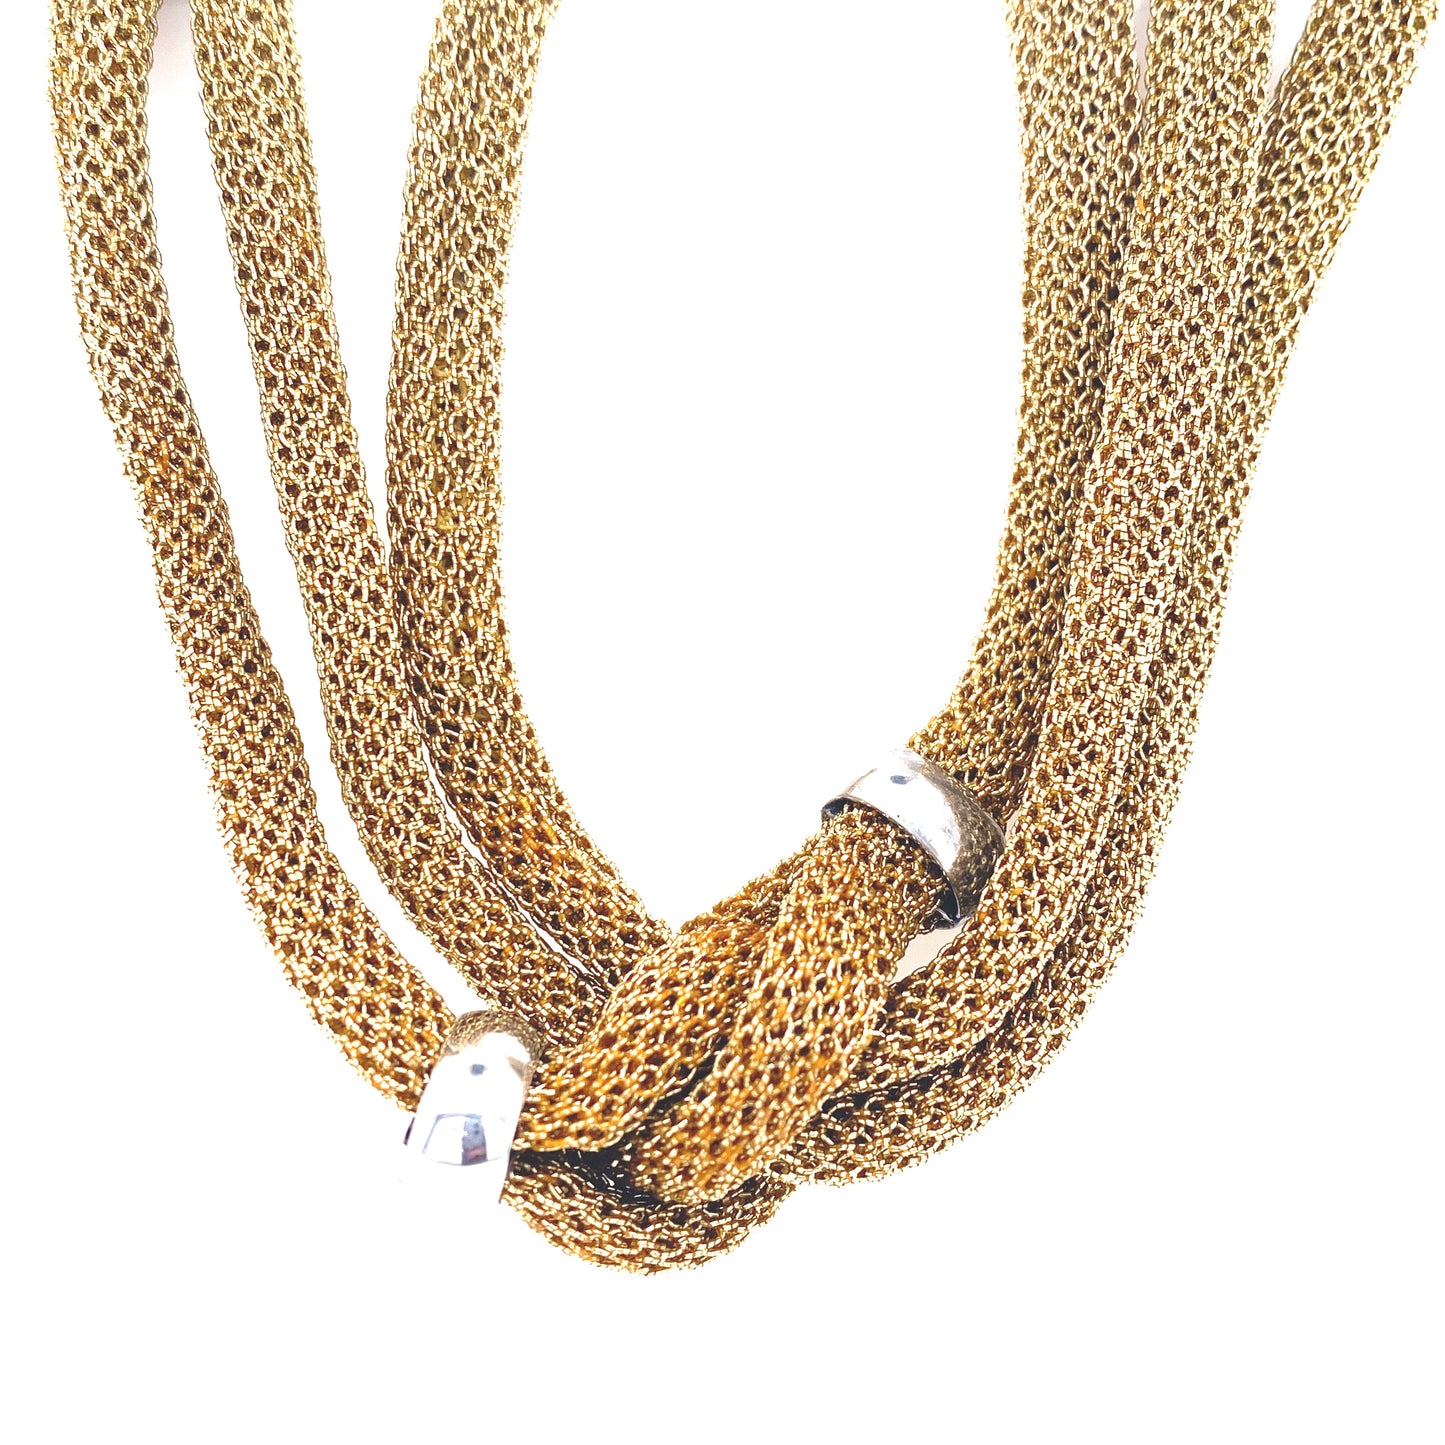 Golden Mesh Necklace with Silver Details | Adami & Martucci | Luby 